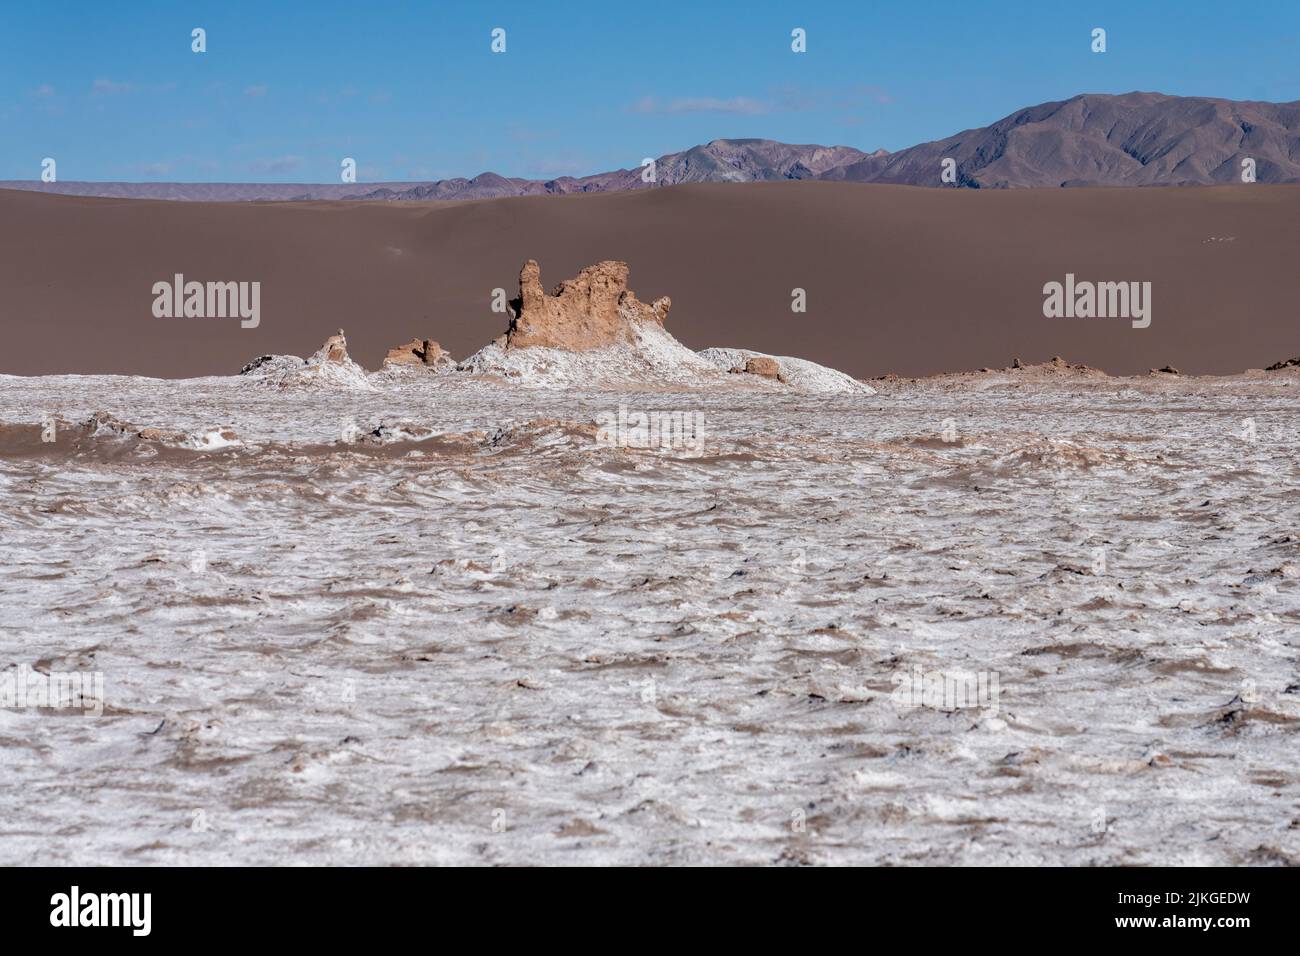 Evaporated salt flats and sand dunes in the Valley of the Moon or Valle de Luna. San Pedro de Atacama, Chile. Stock Photo